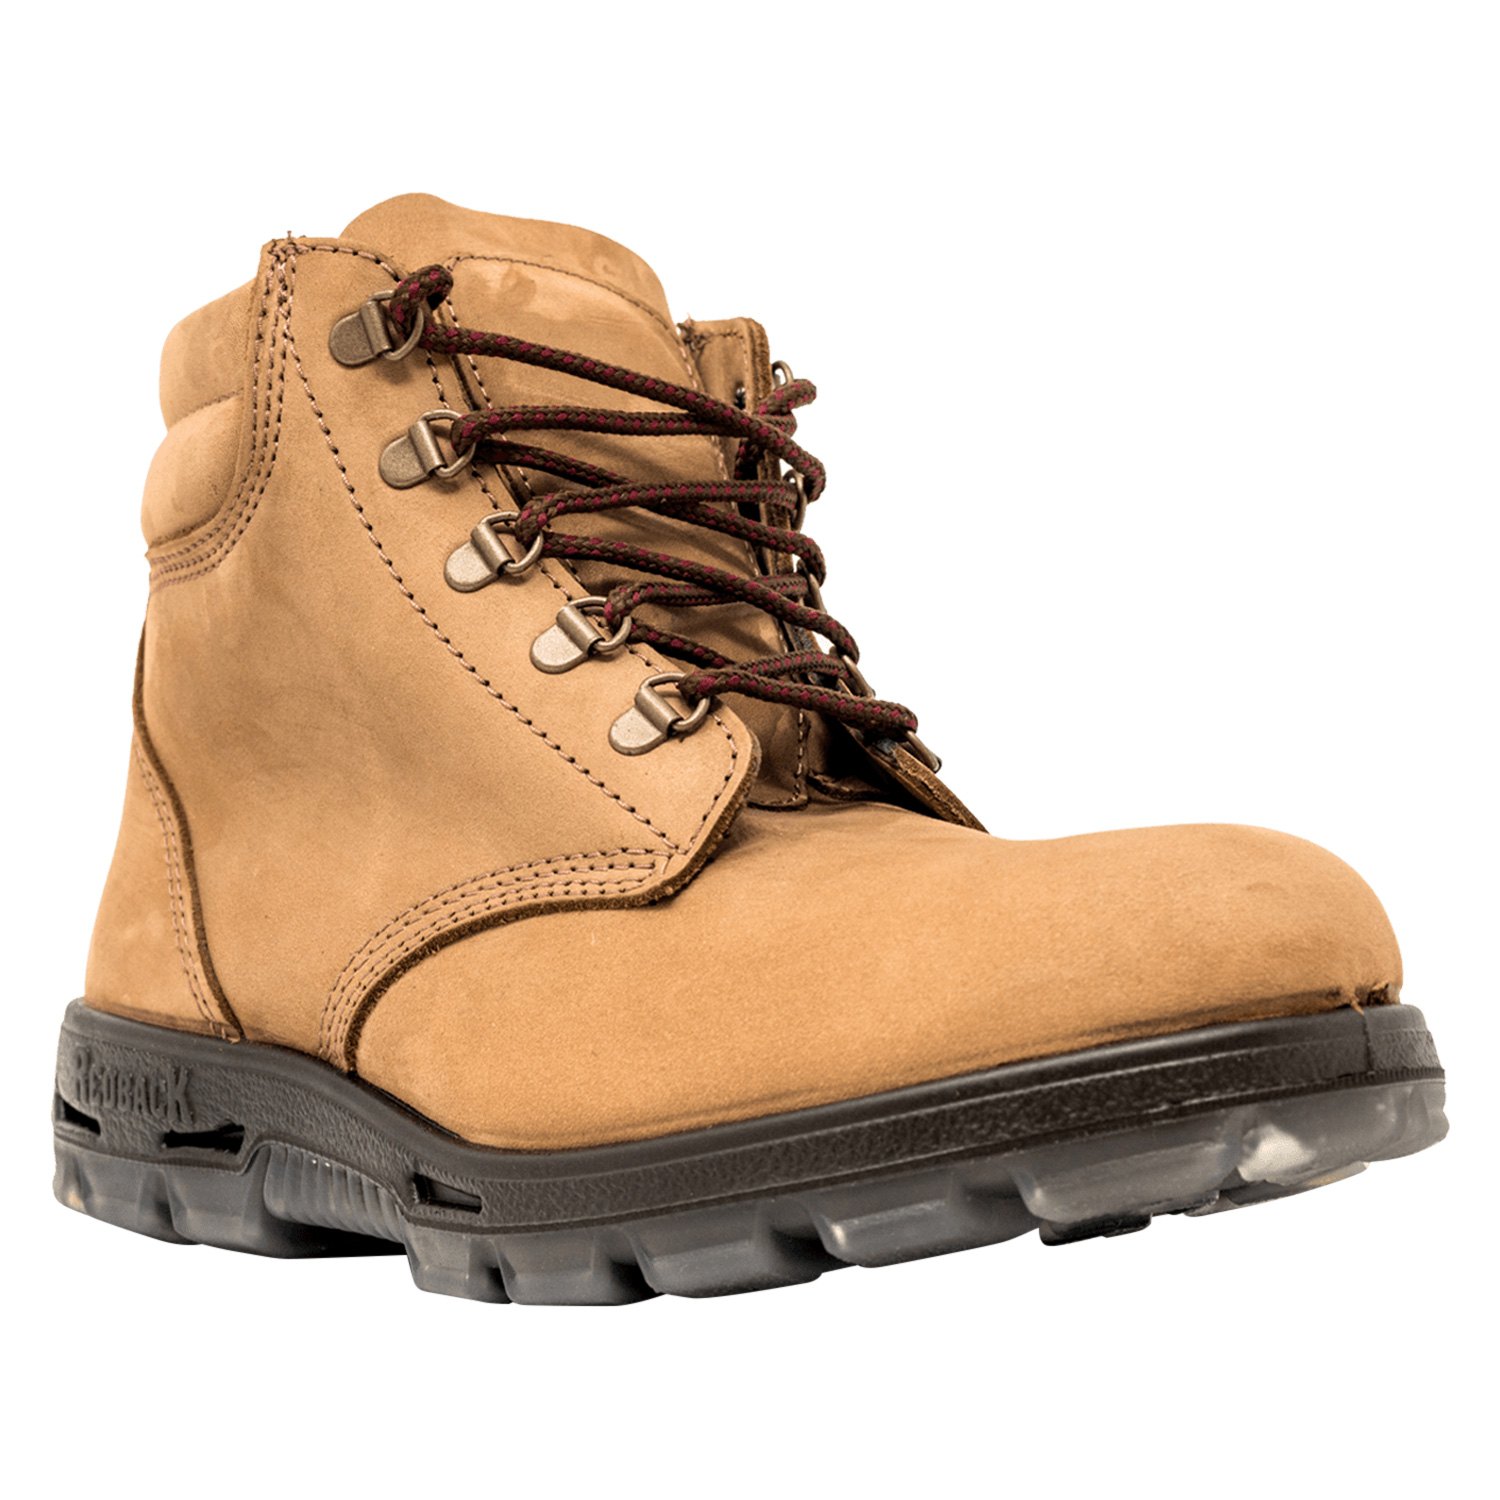 Redback Boots® USACH10.5 - Outland™ 11.5 Size Brown 6